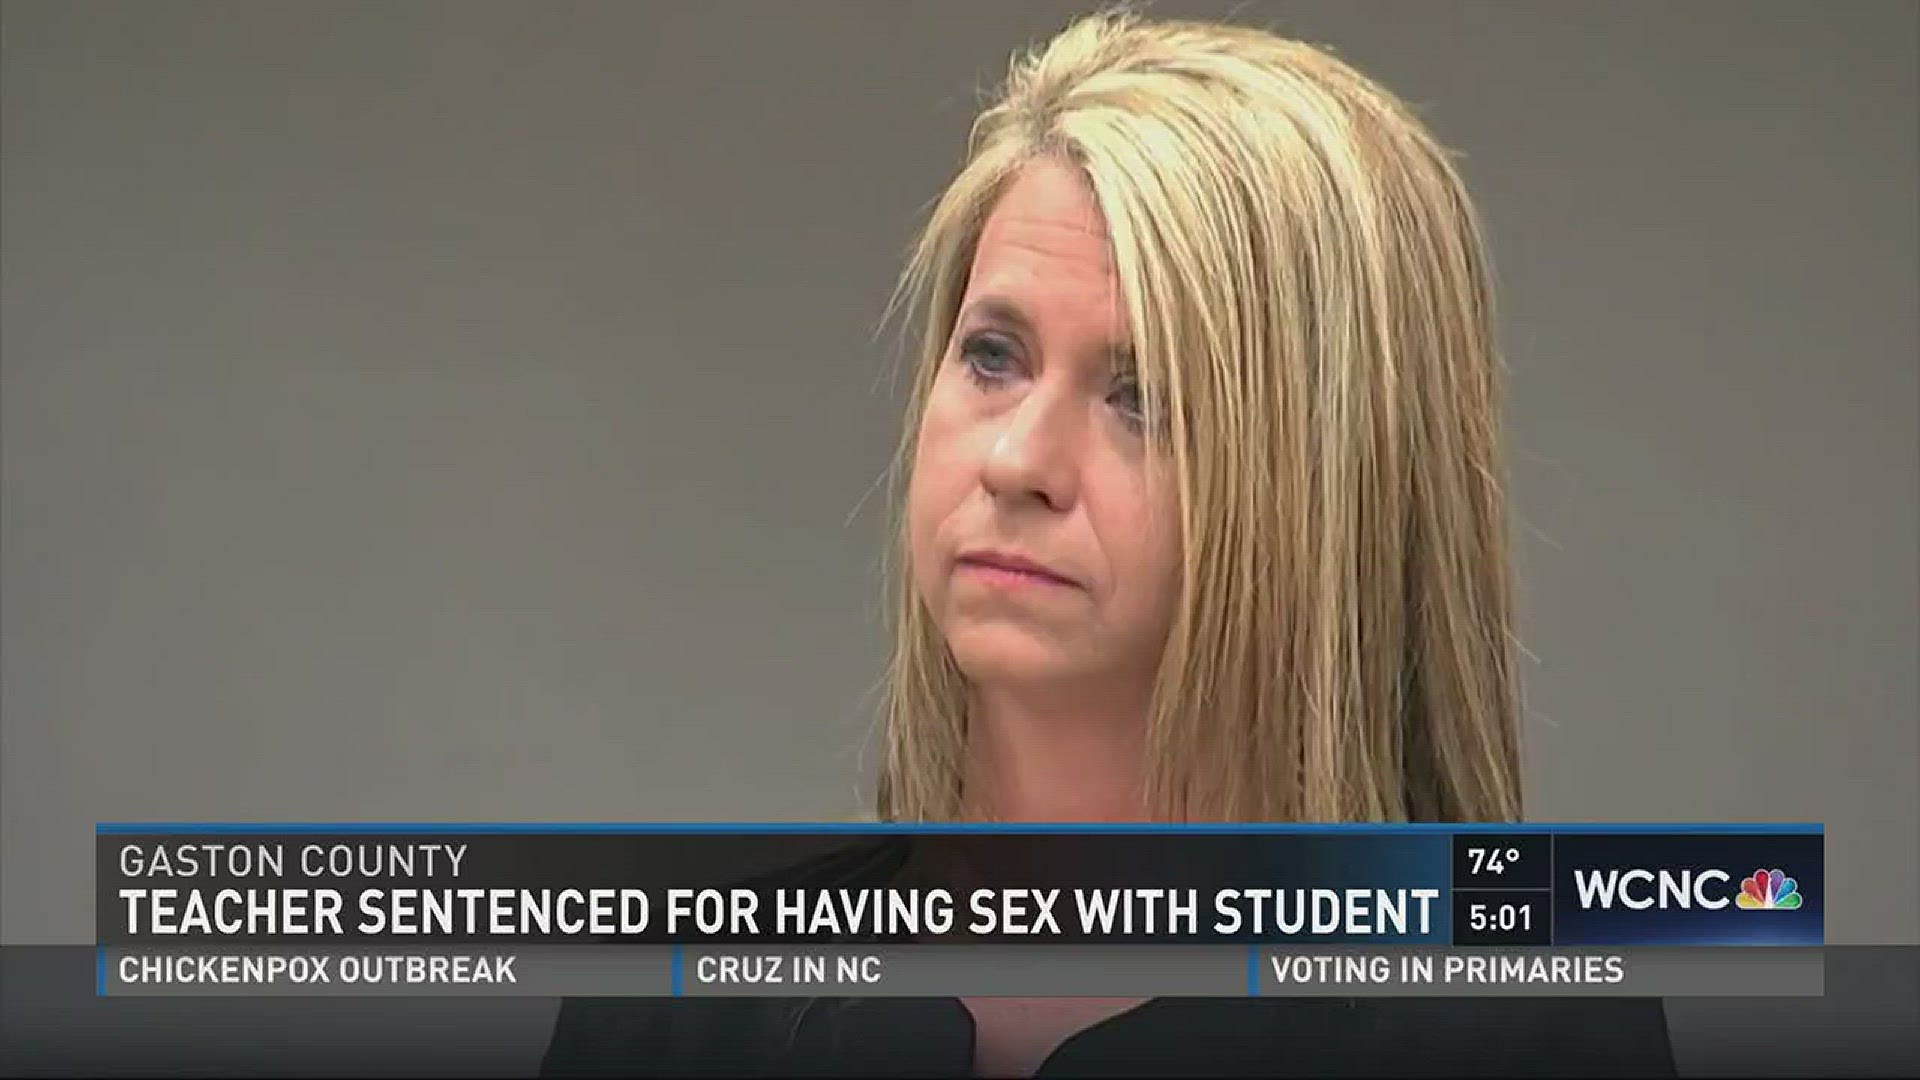 The teen's mother says she's shocked and angry about the decision.